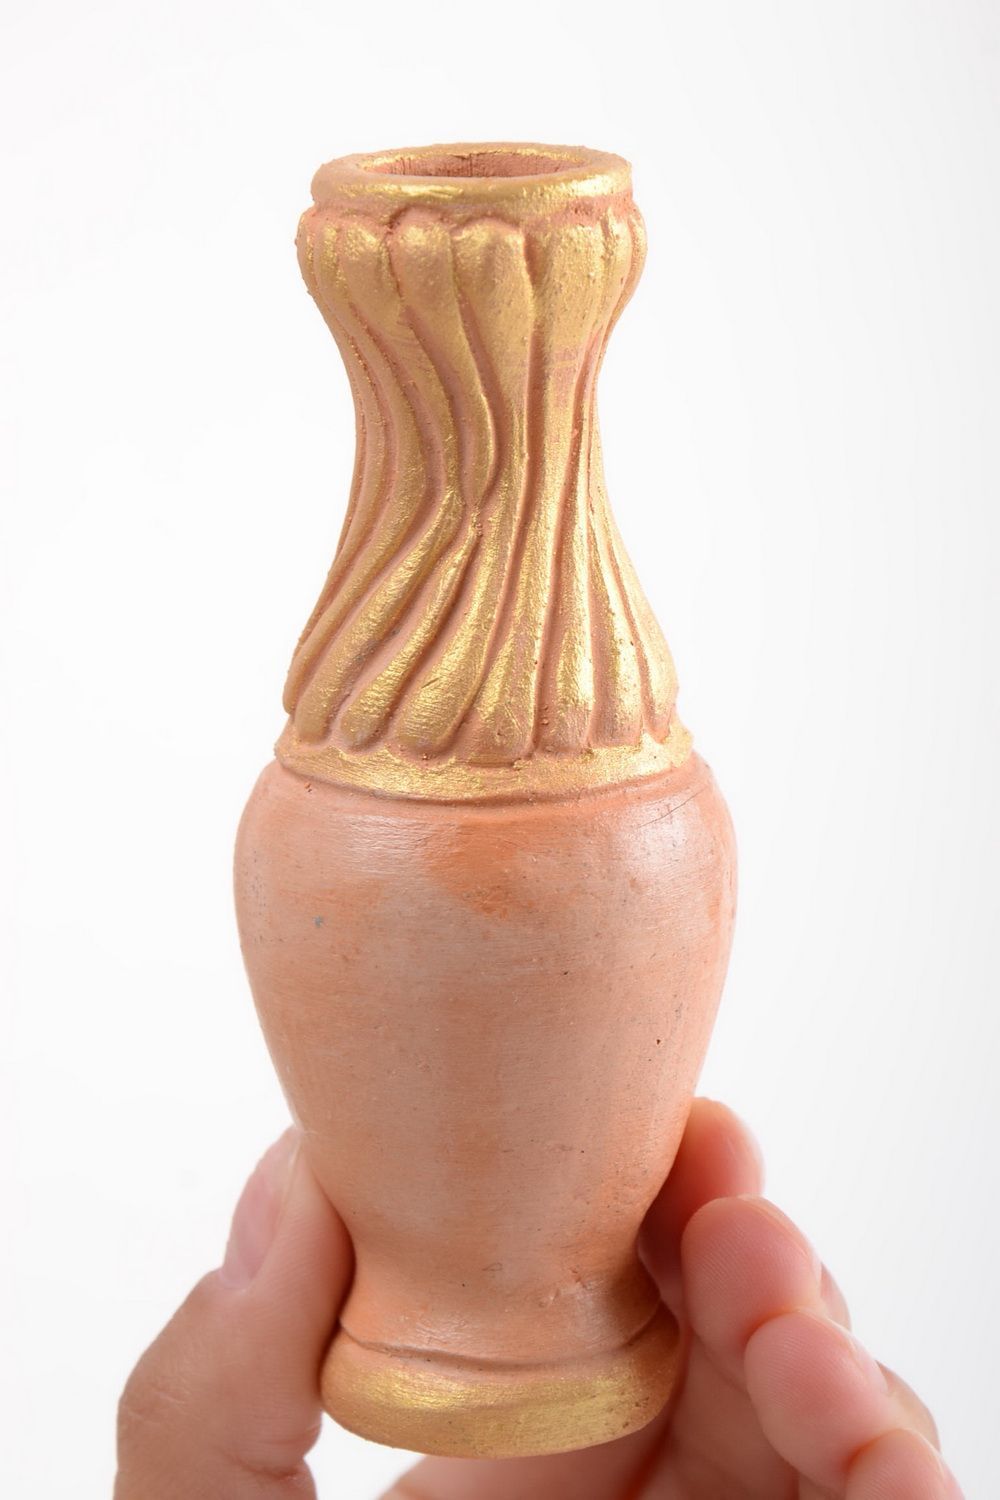 Clay beige vase 4 inches for table or shelf décor 3 oz, 0,19 lb photo 5